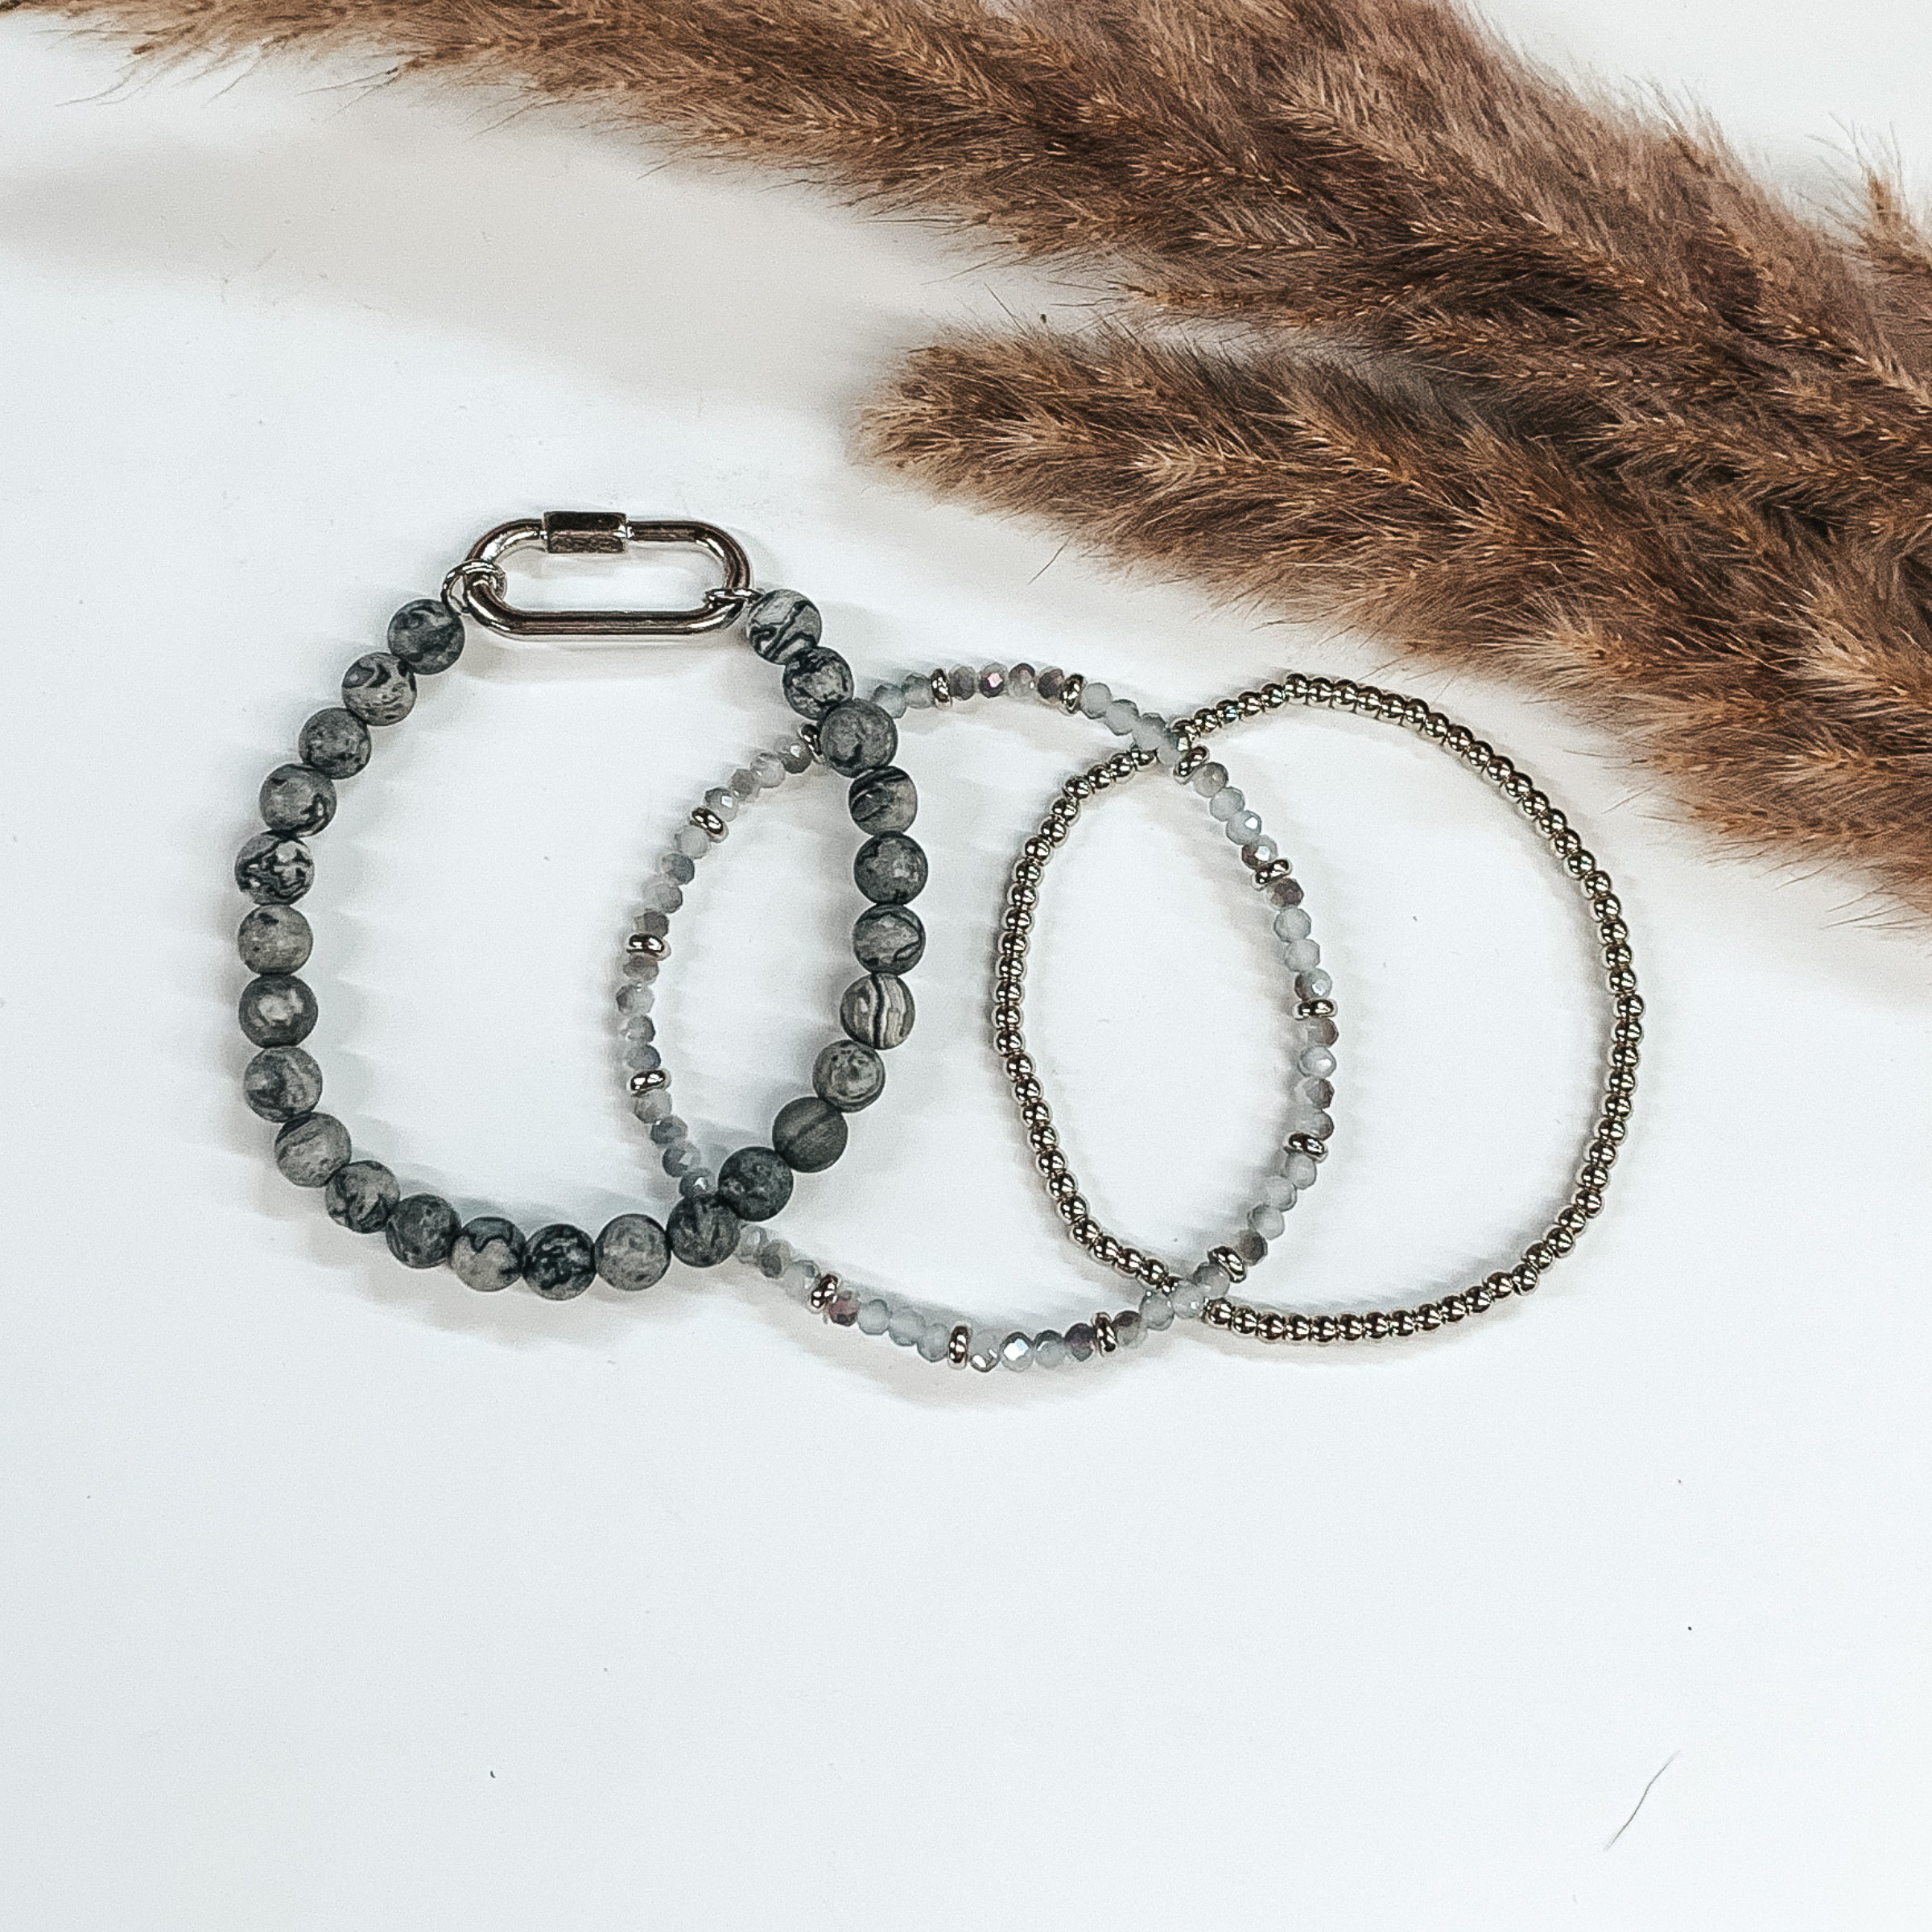 Pebble Beach Bracelets in Grey/Silver - Giddy Up Glamour Boutique